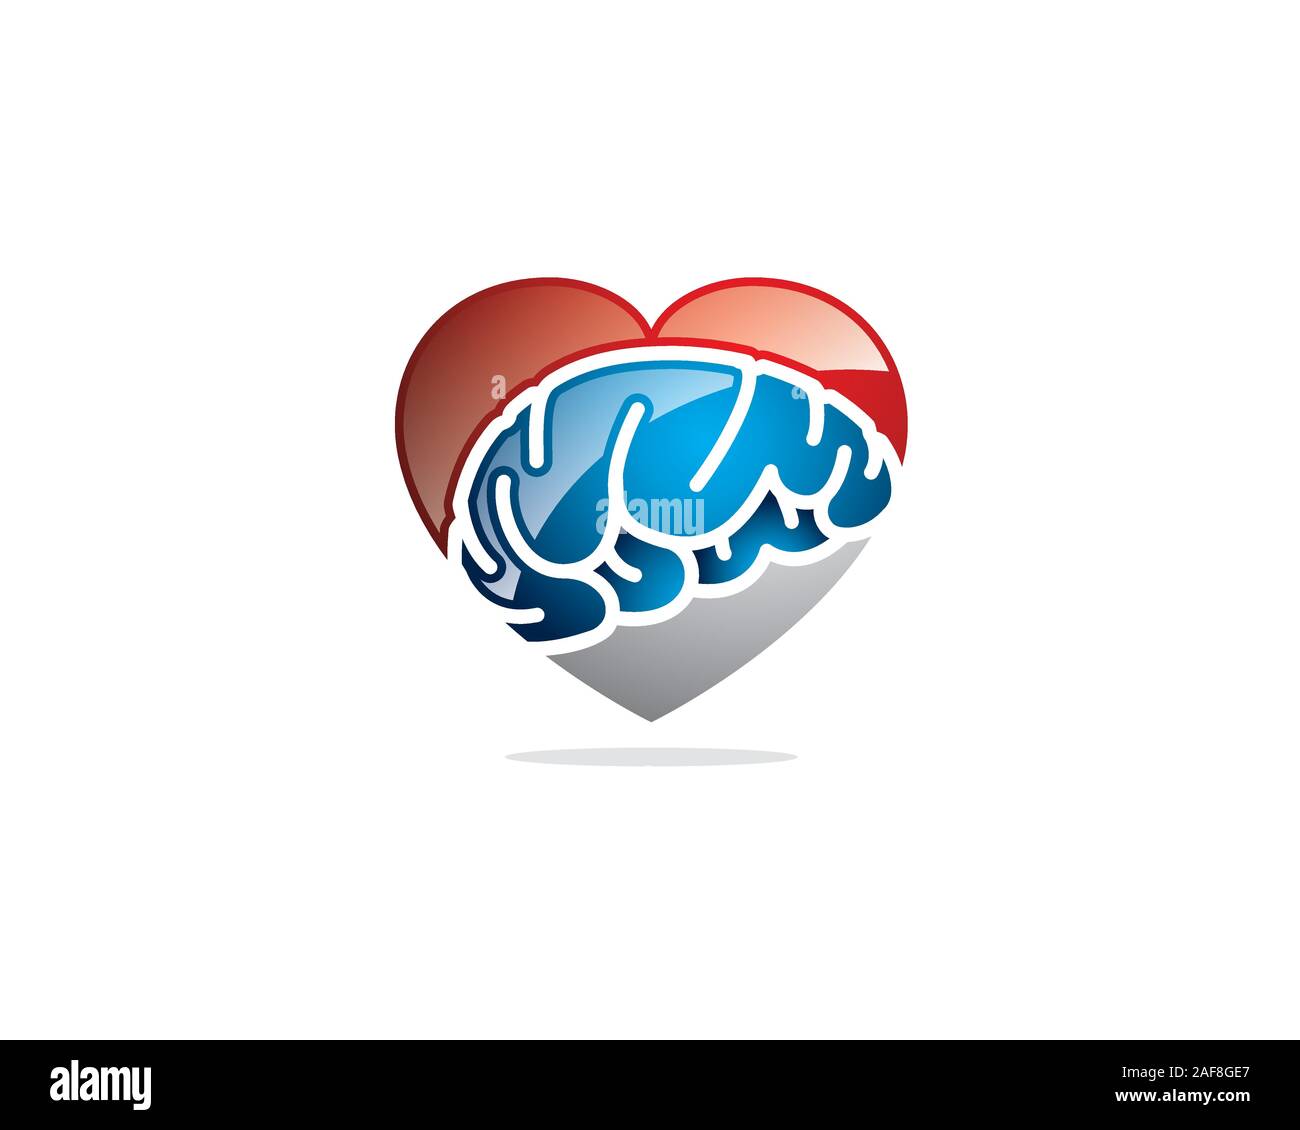 3d glossy heart love image filled with brain image Stock Vector